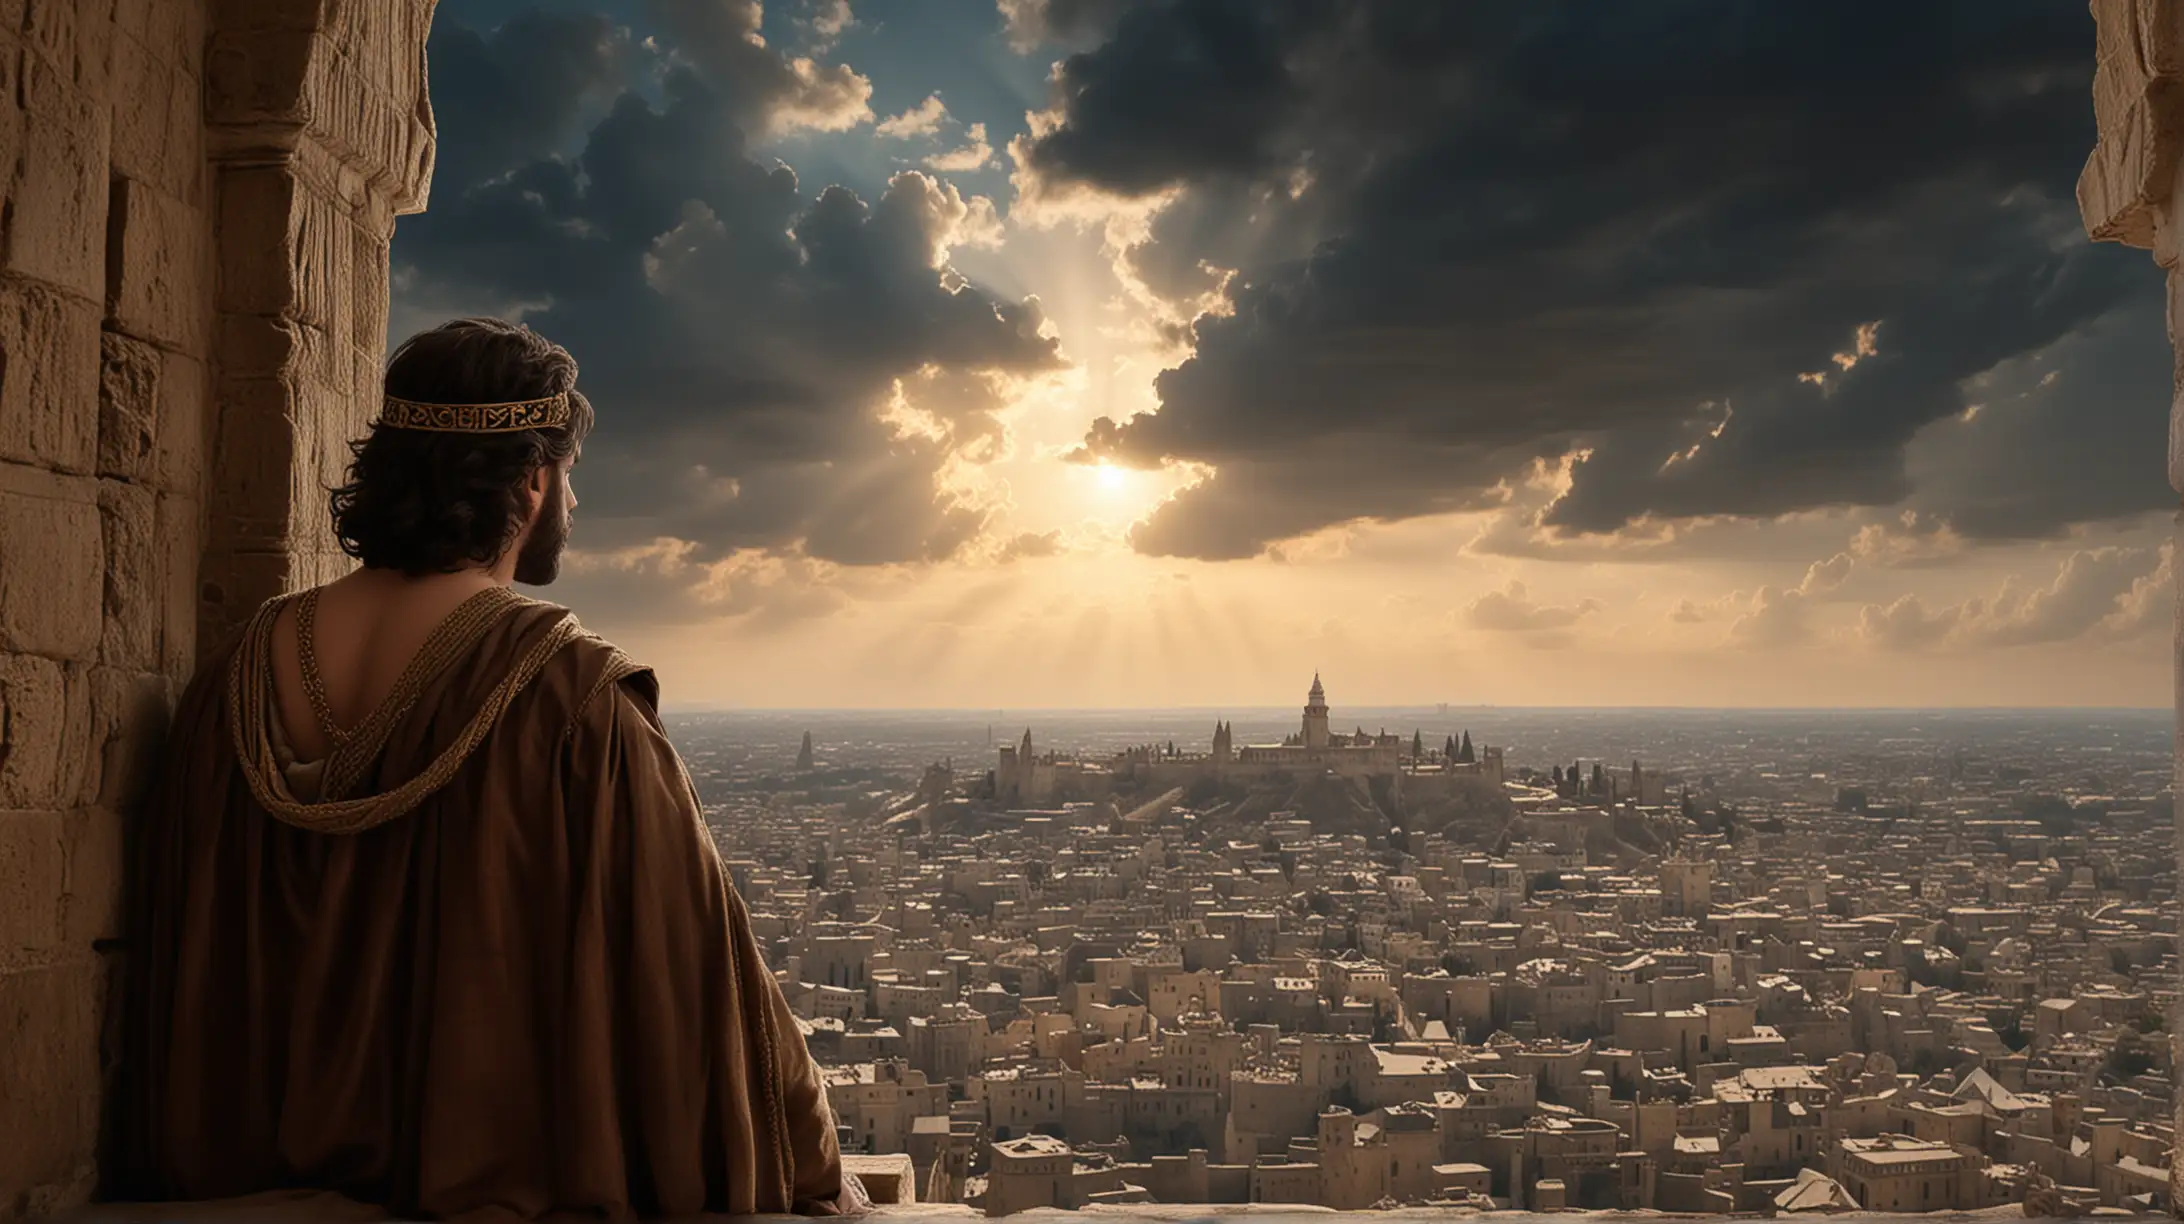 King Looking Over His Castle Towards a Jewish Temple under Magnificent Sky